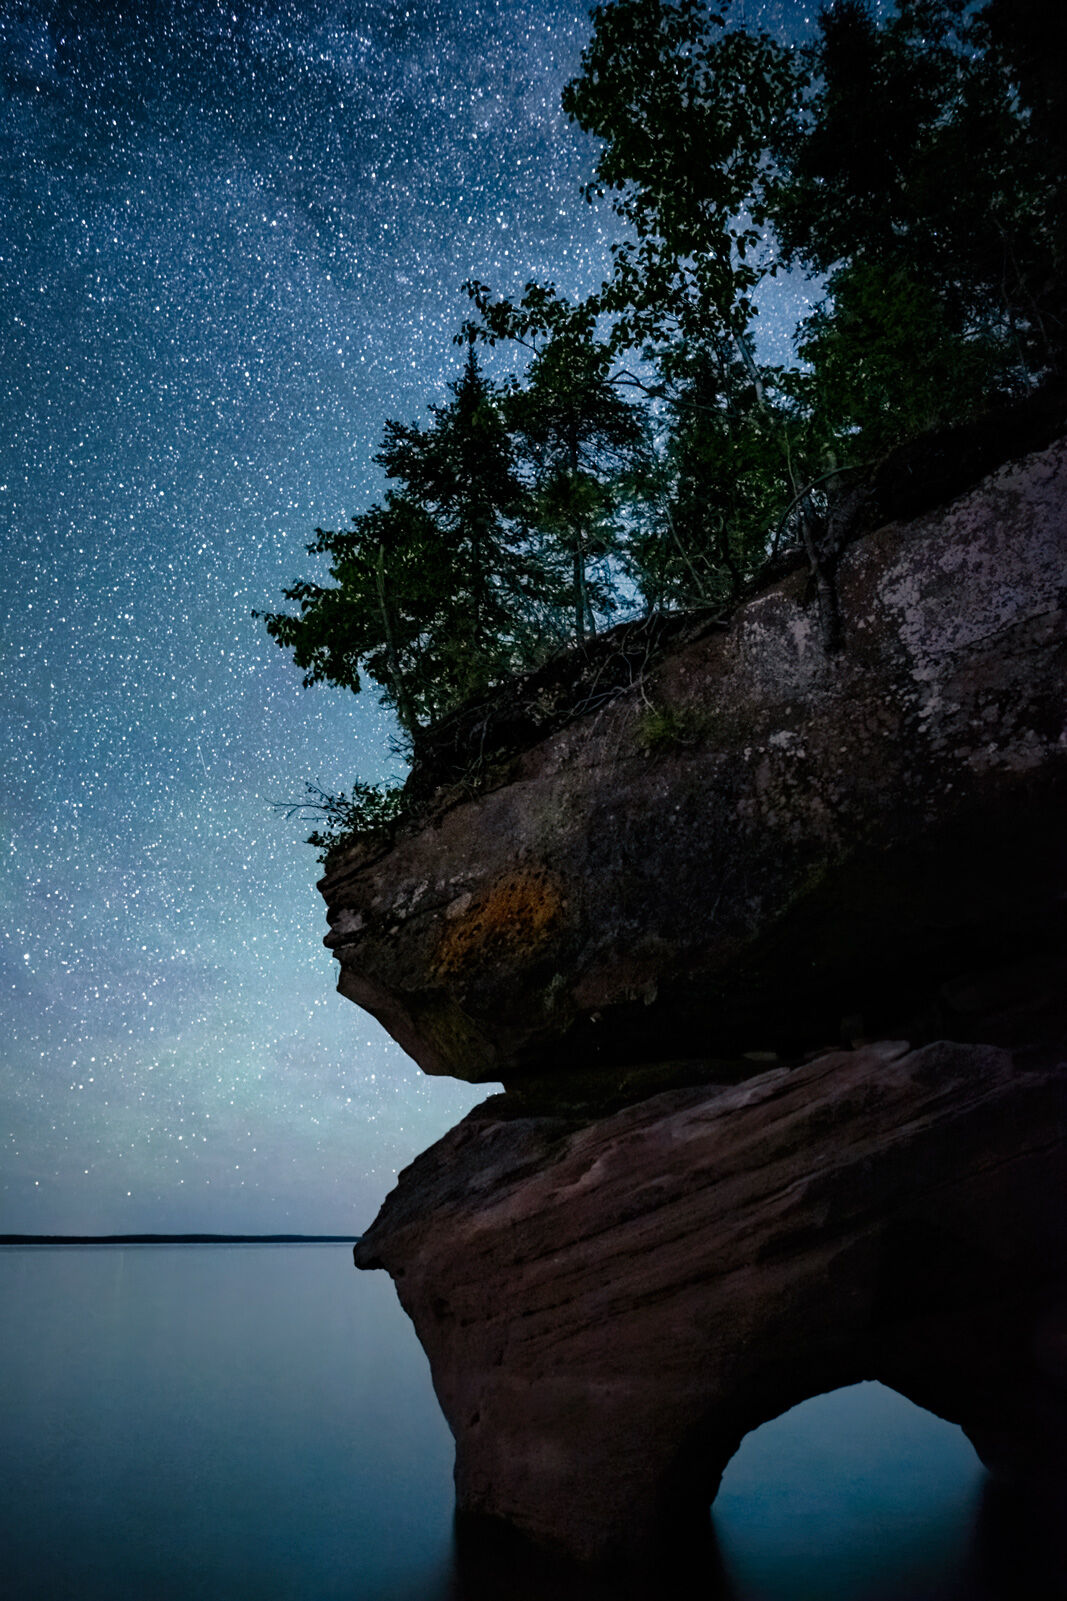 a night time image of a sandstone cliff with a porthole and the starry sky above